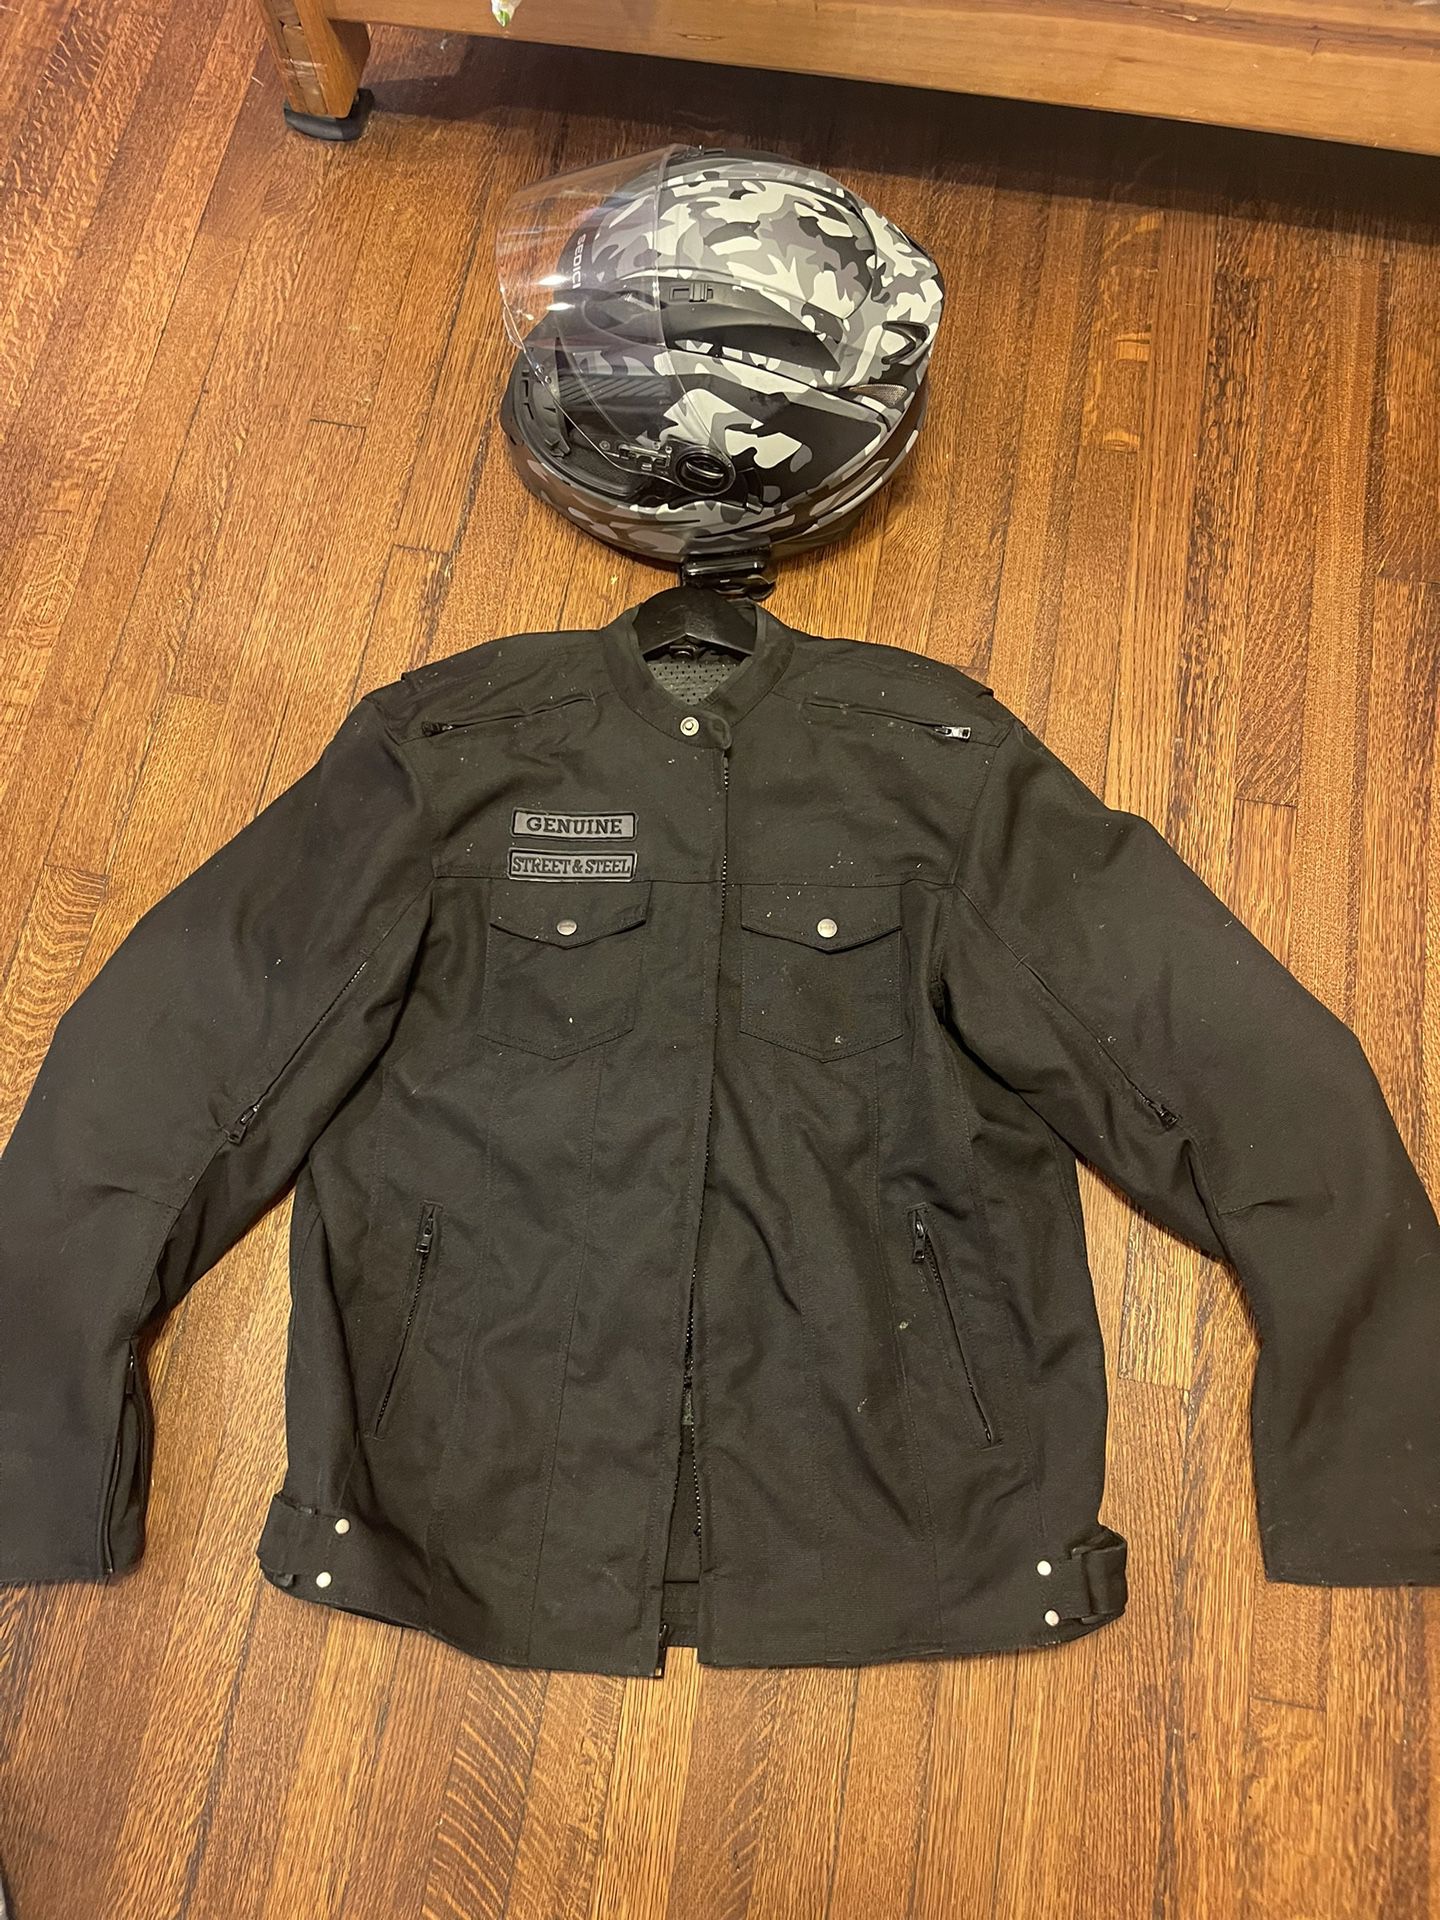 XL Motorcycle Jacket, Large Helmet With Bluetooth Headset